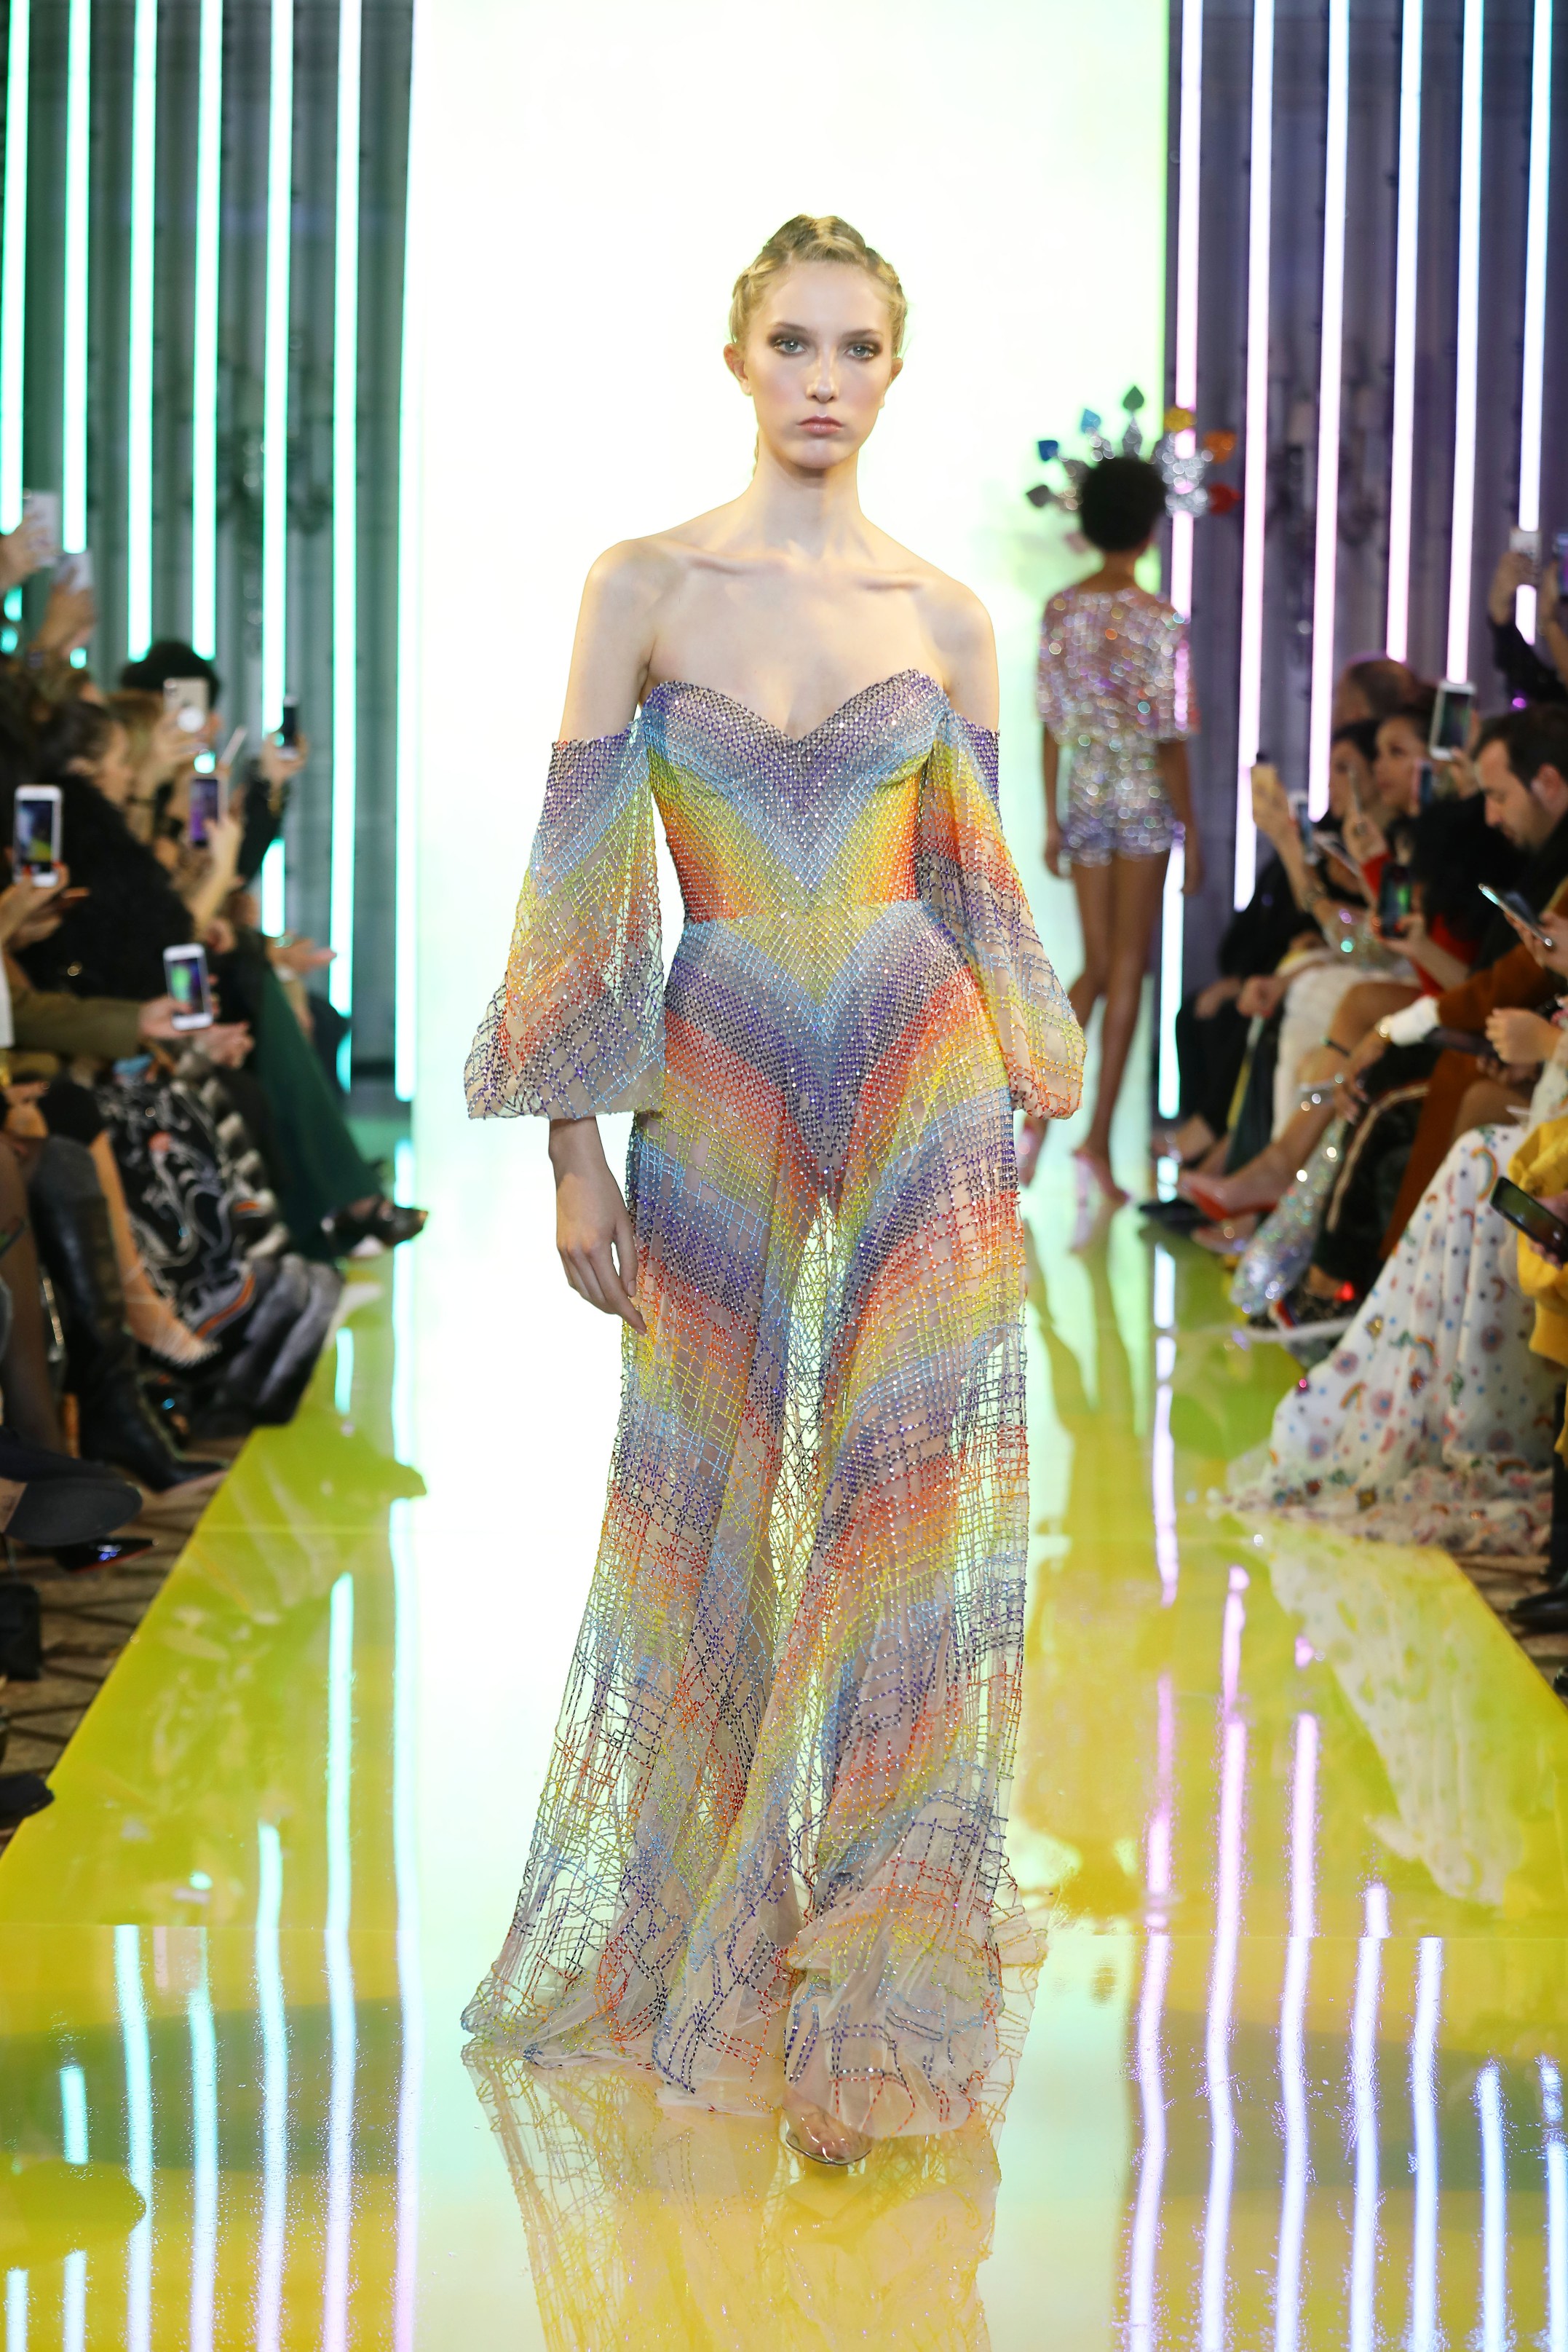 SS19-5 Rainbow Colored See-Through Dress Embellished With Beads And Swarovski Crystals, Featuring Puffy Sleeves .jpg